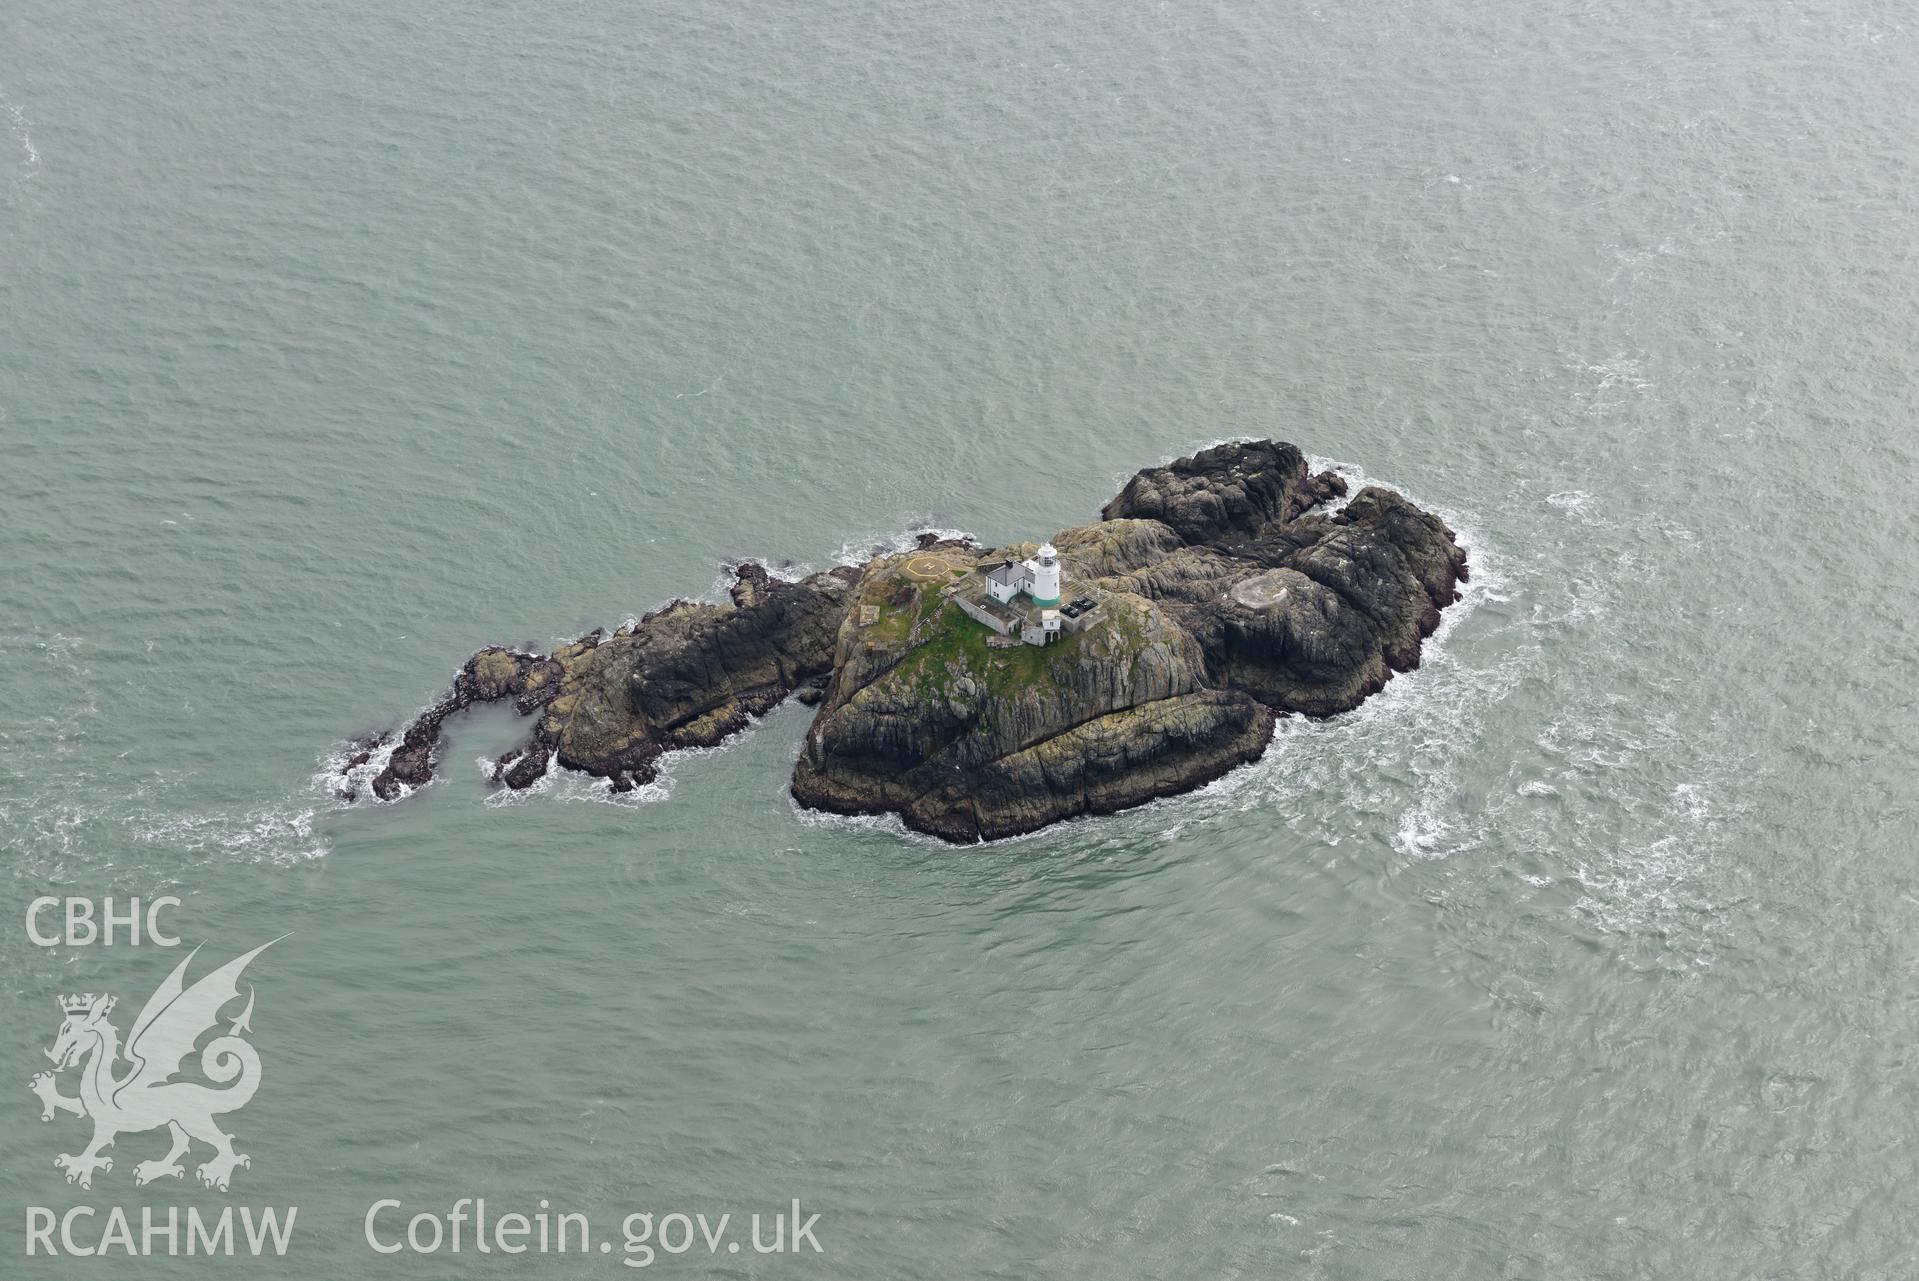 South Bishop Lighthouse at extreme low tide. Baseline aerial reconnaissance survey for the CHERISH Project. ? Crown: CHERISH PROJECT 2017. Produced with EU funds through the Ireland Wales Co-operation Programme 2014-2020. All material made freely available through the Open Government Licence.